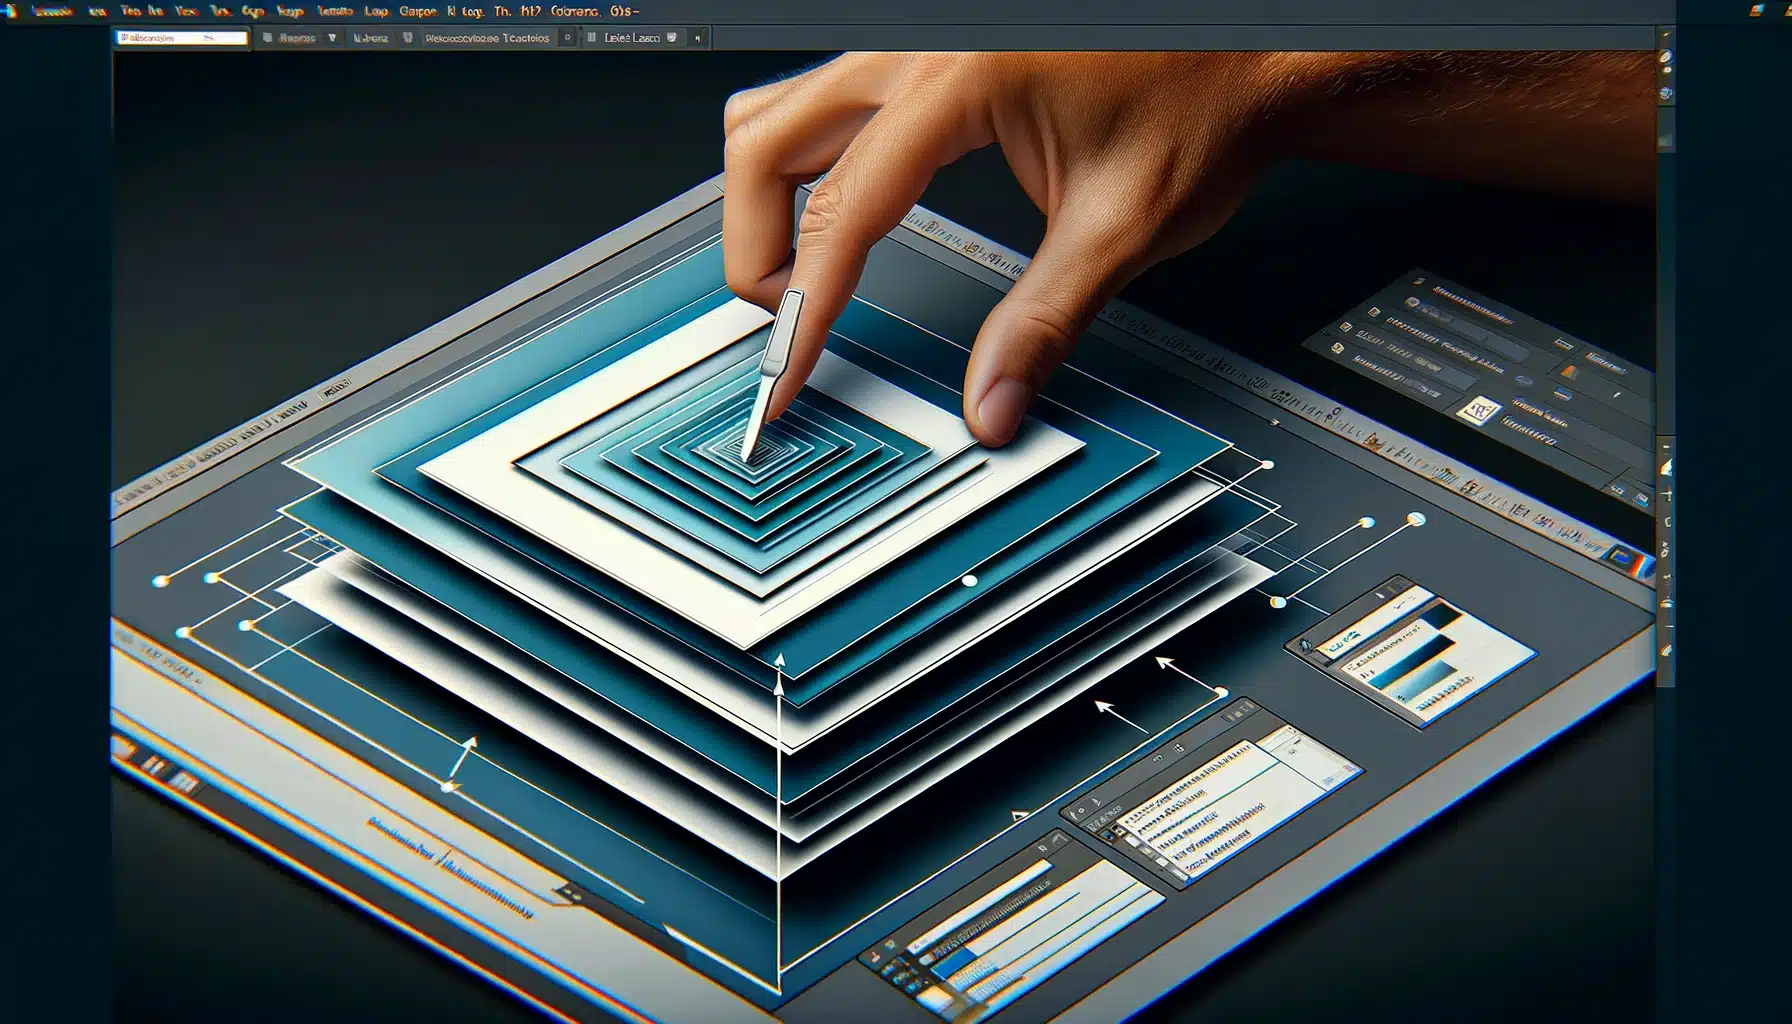 Adobe Photoshop interface showing the resizing of layers with transformation tools and adjustment settings.